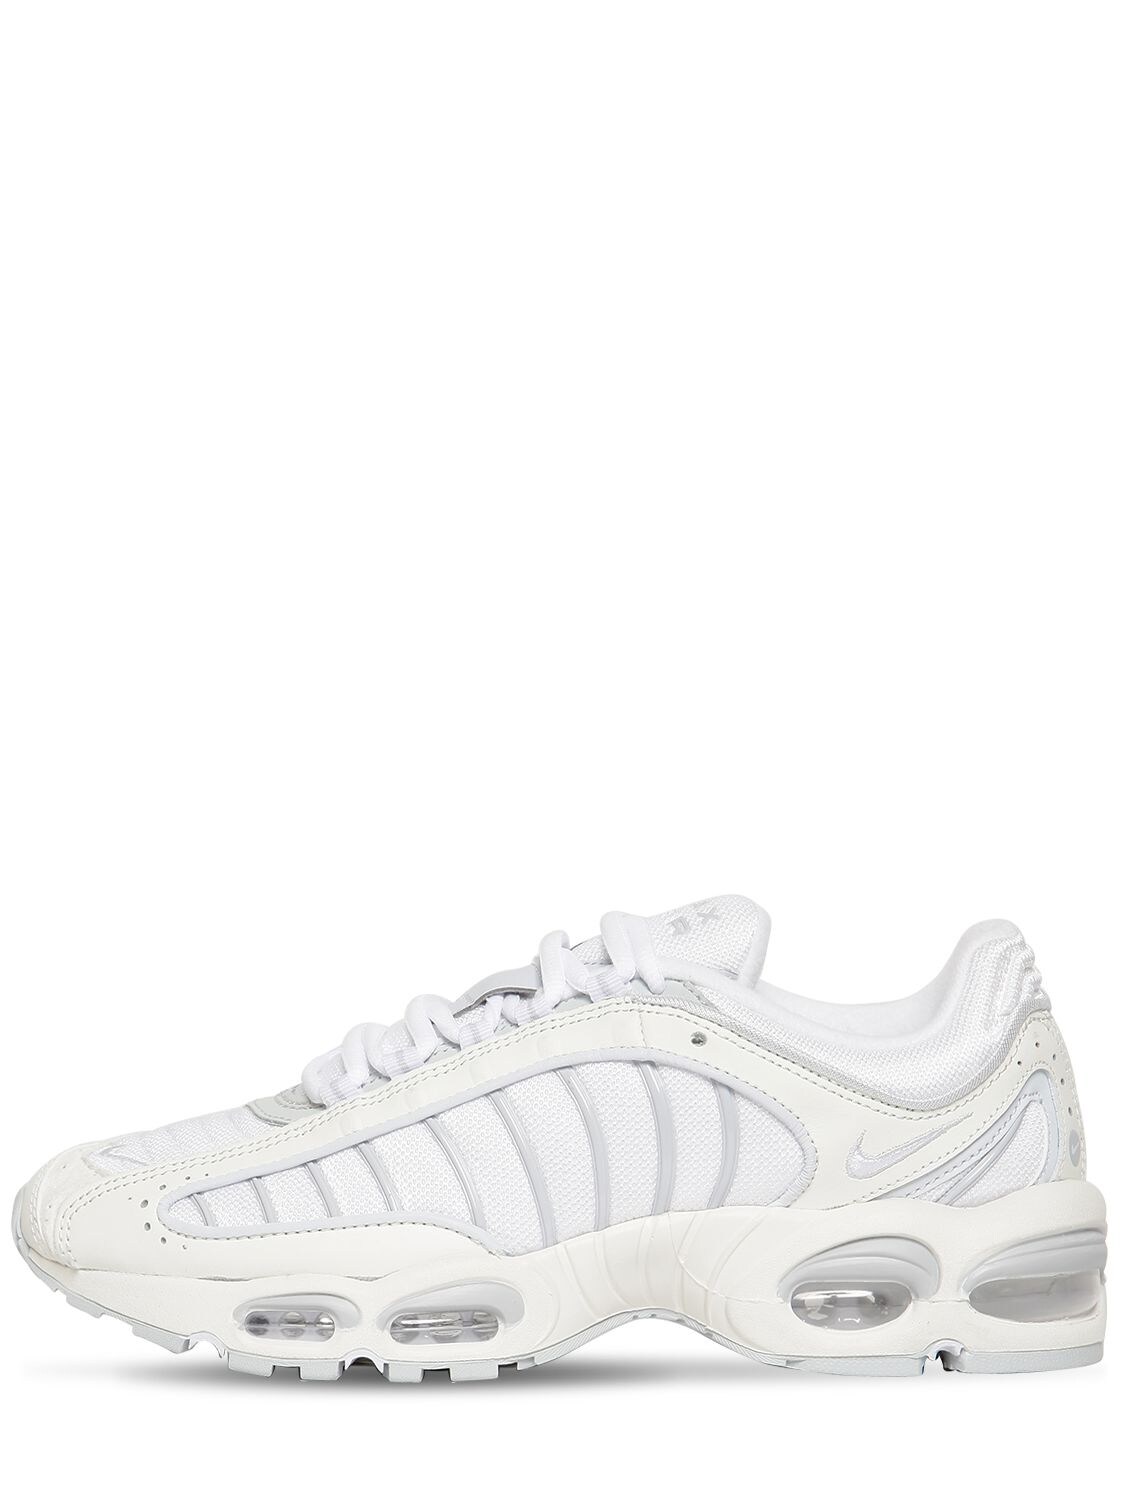 Nike Air Max Tailwind Iv Sneakers In White